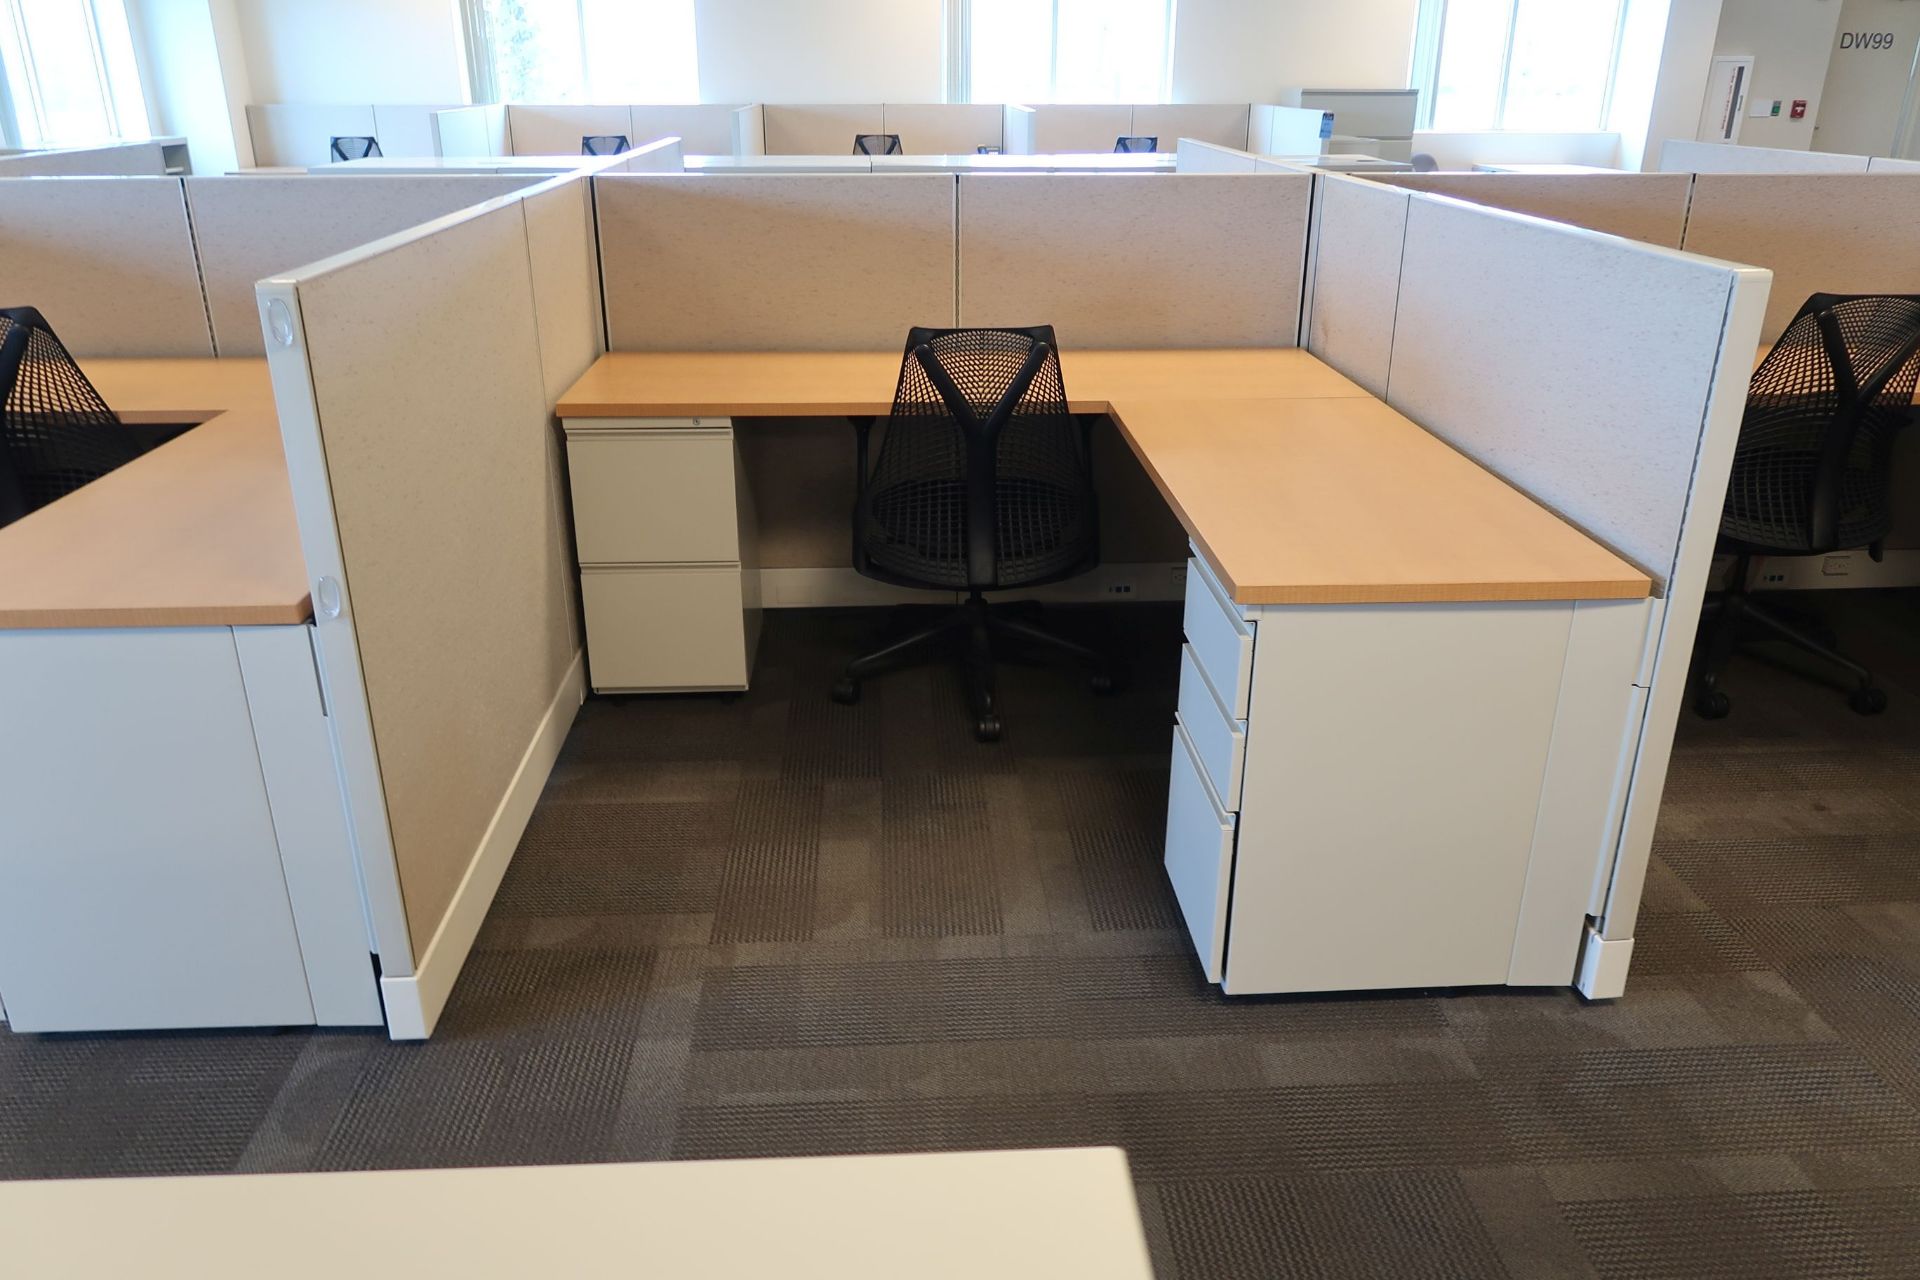 (LOT) 10-PERSON HERMAN MILLER CUBICLE SET 47" HIGH WALLS WITH CHAIRS - Image 4 of 11